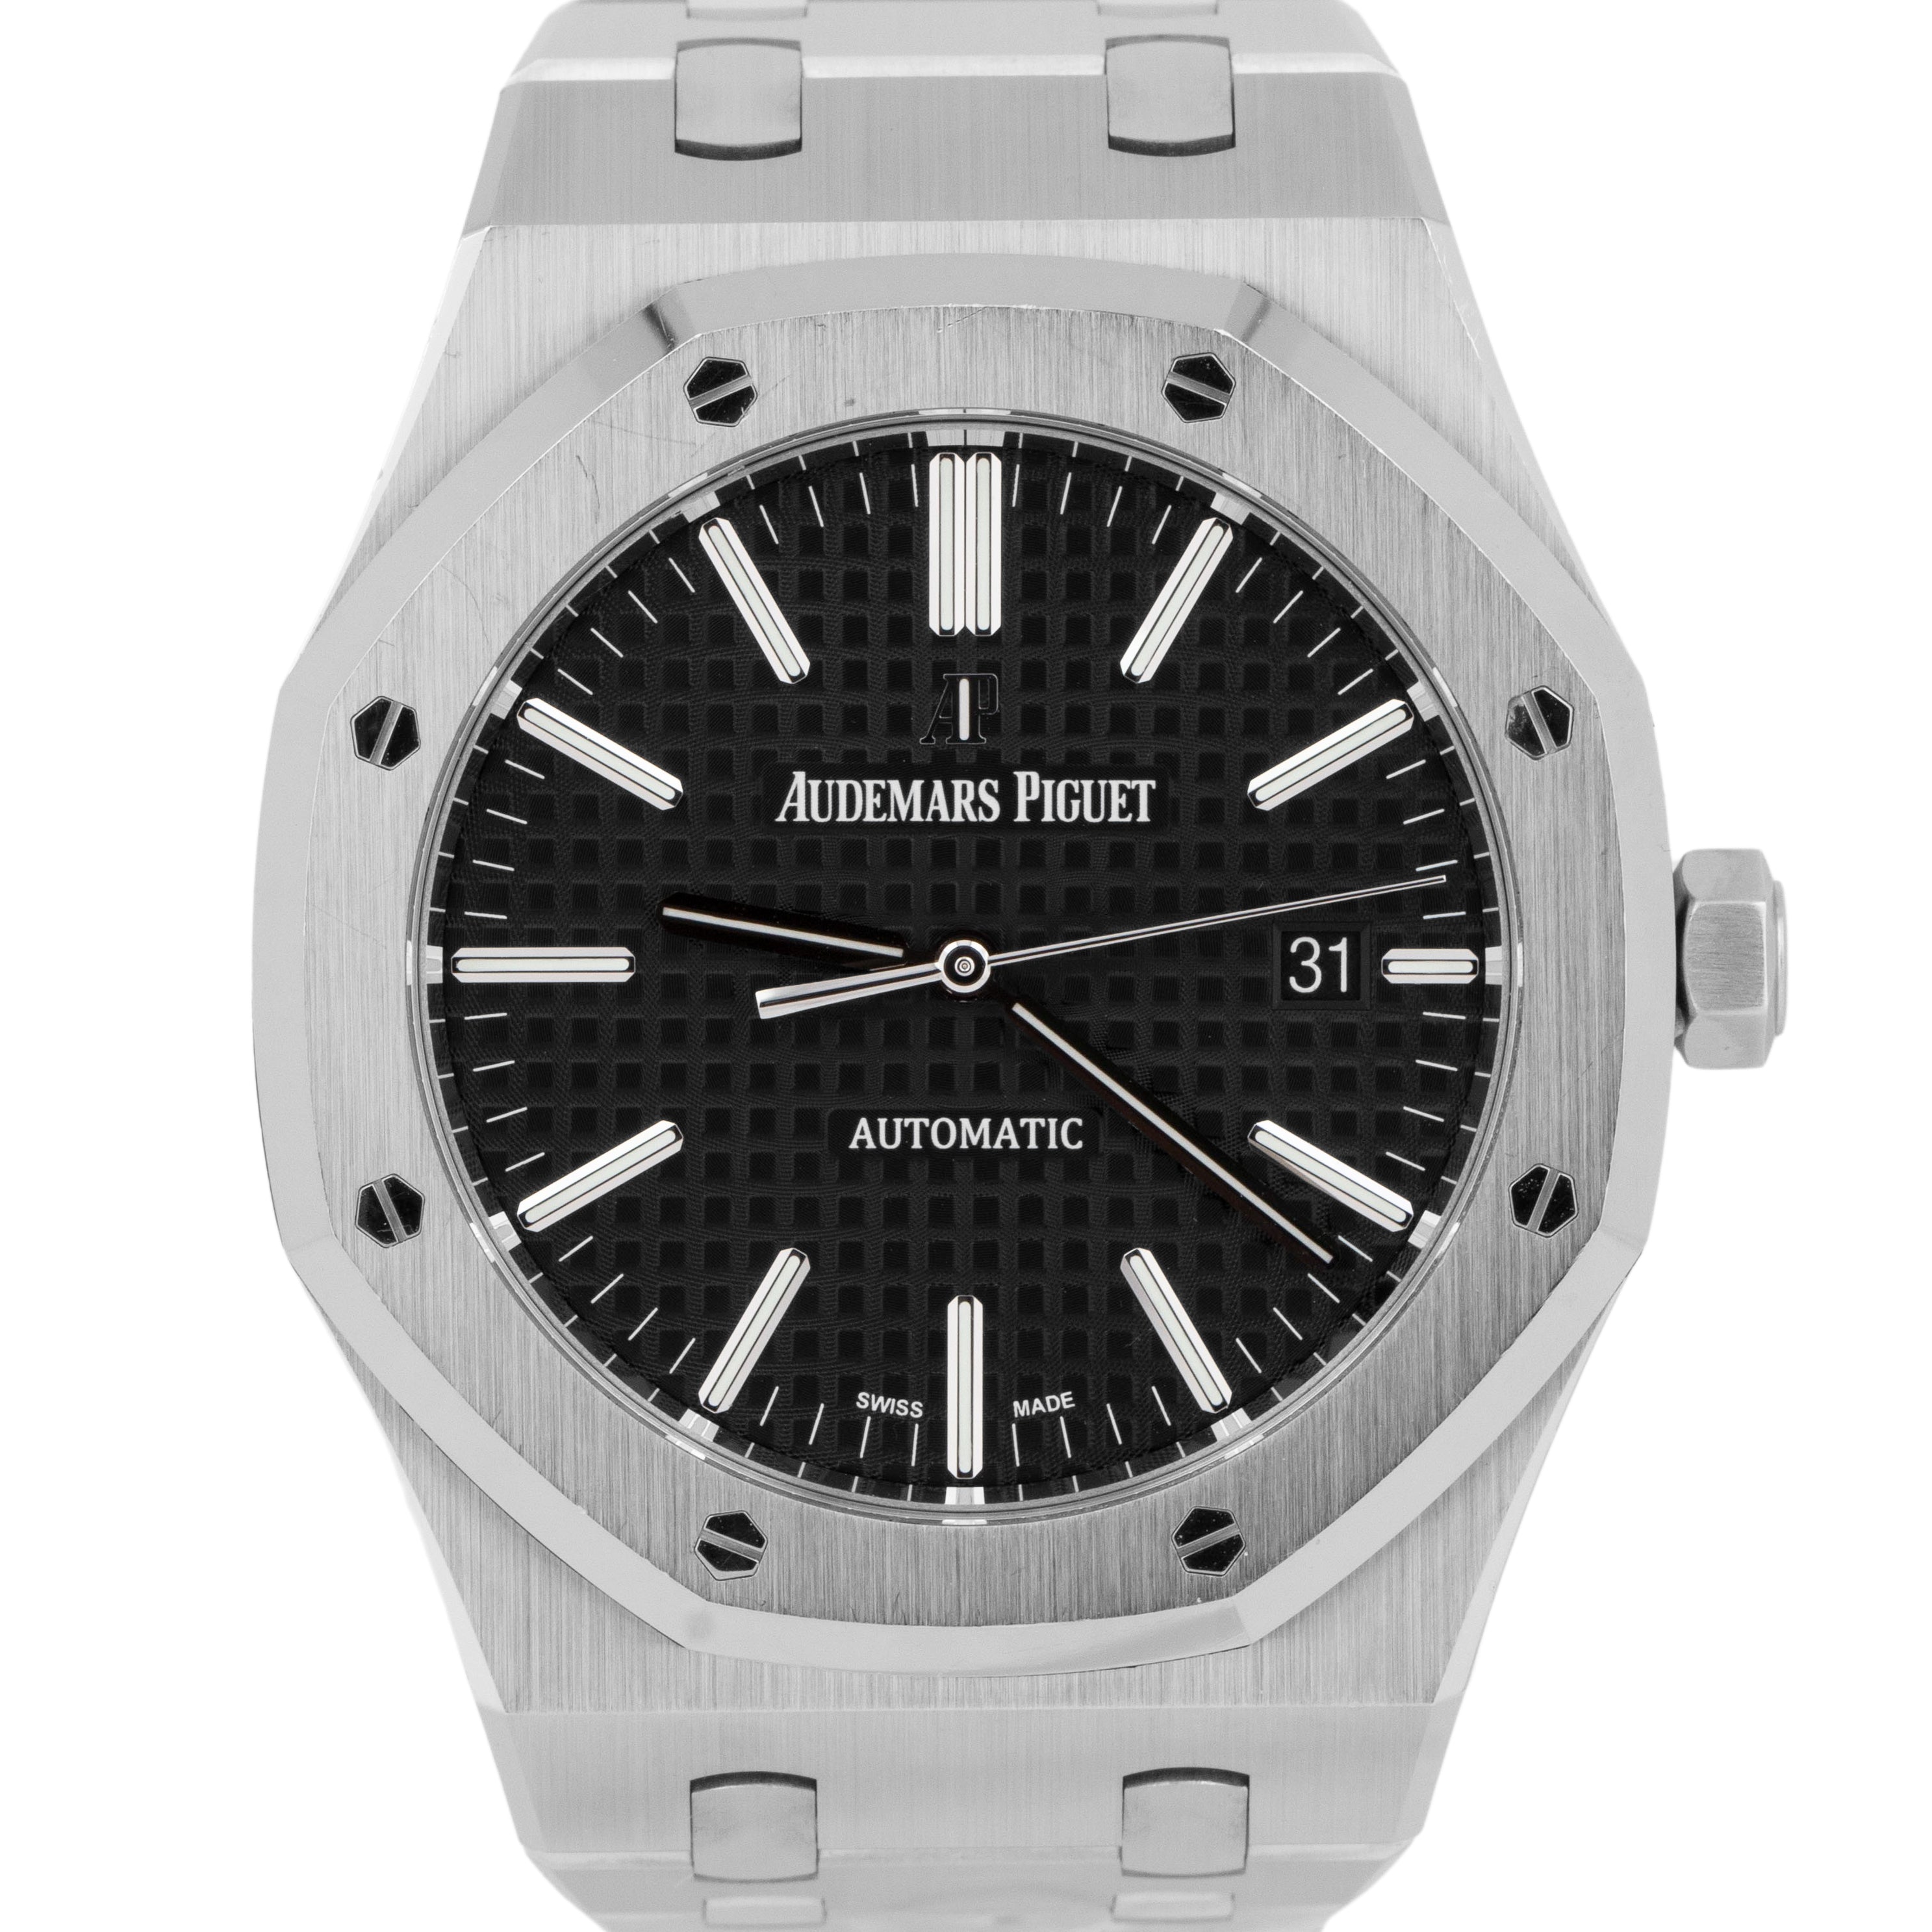 Best Price on all AUDEMARS PIGUET ROYAL OAK Watches Guaranteed at